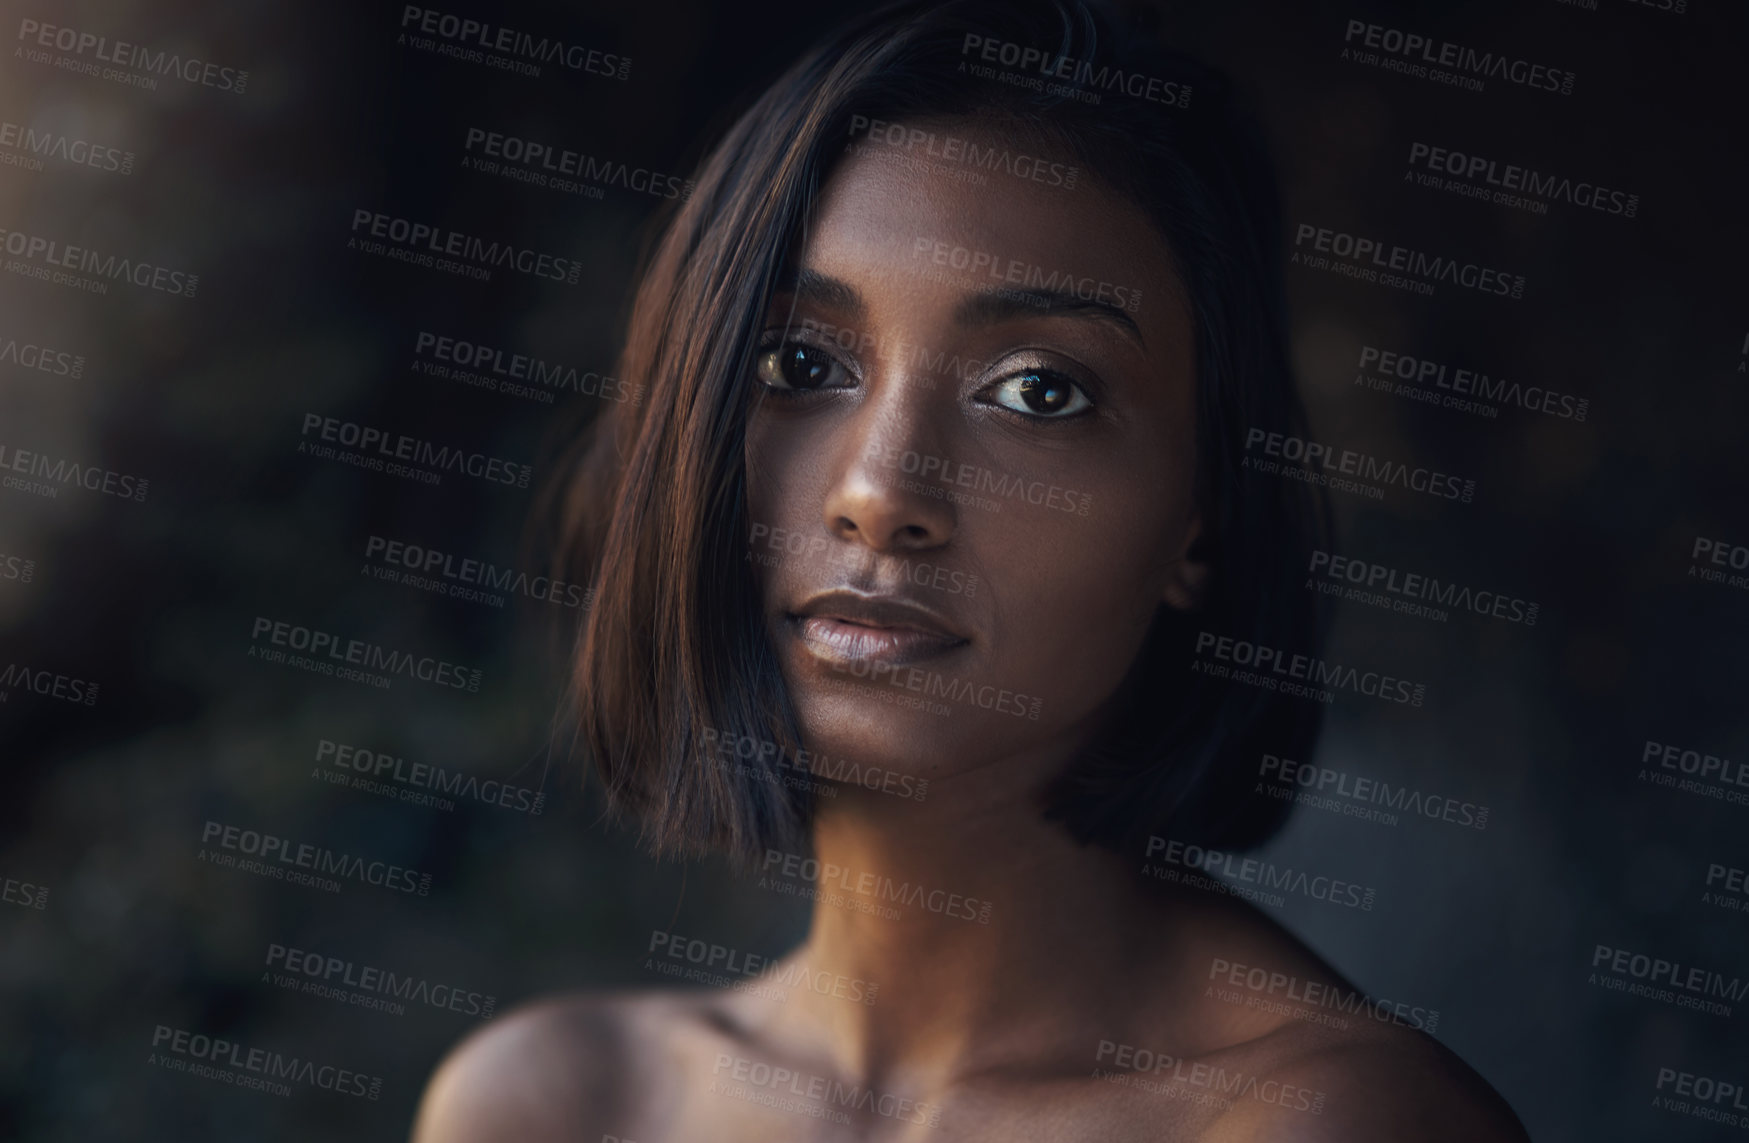 Buy stock photo Cropped shot of a beautiful young woman posing against a dark background